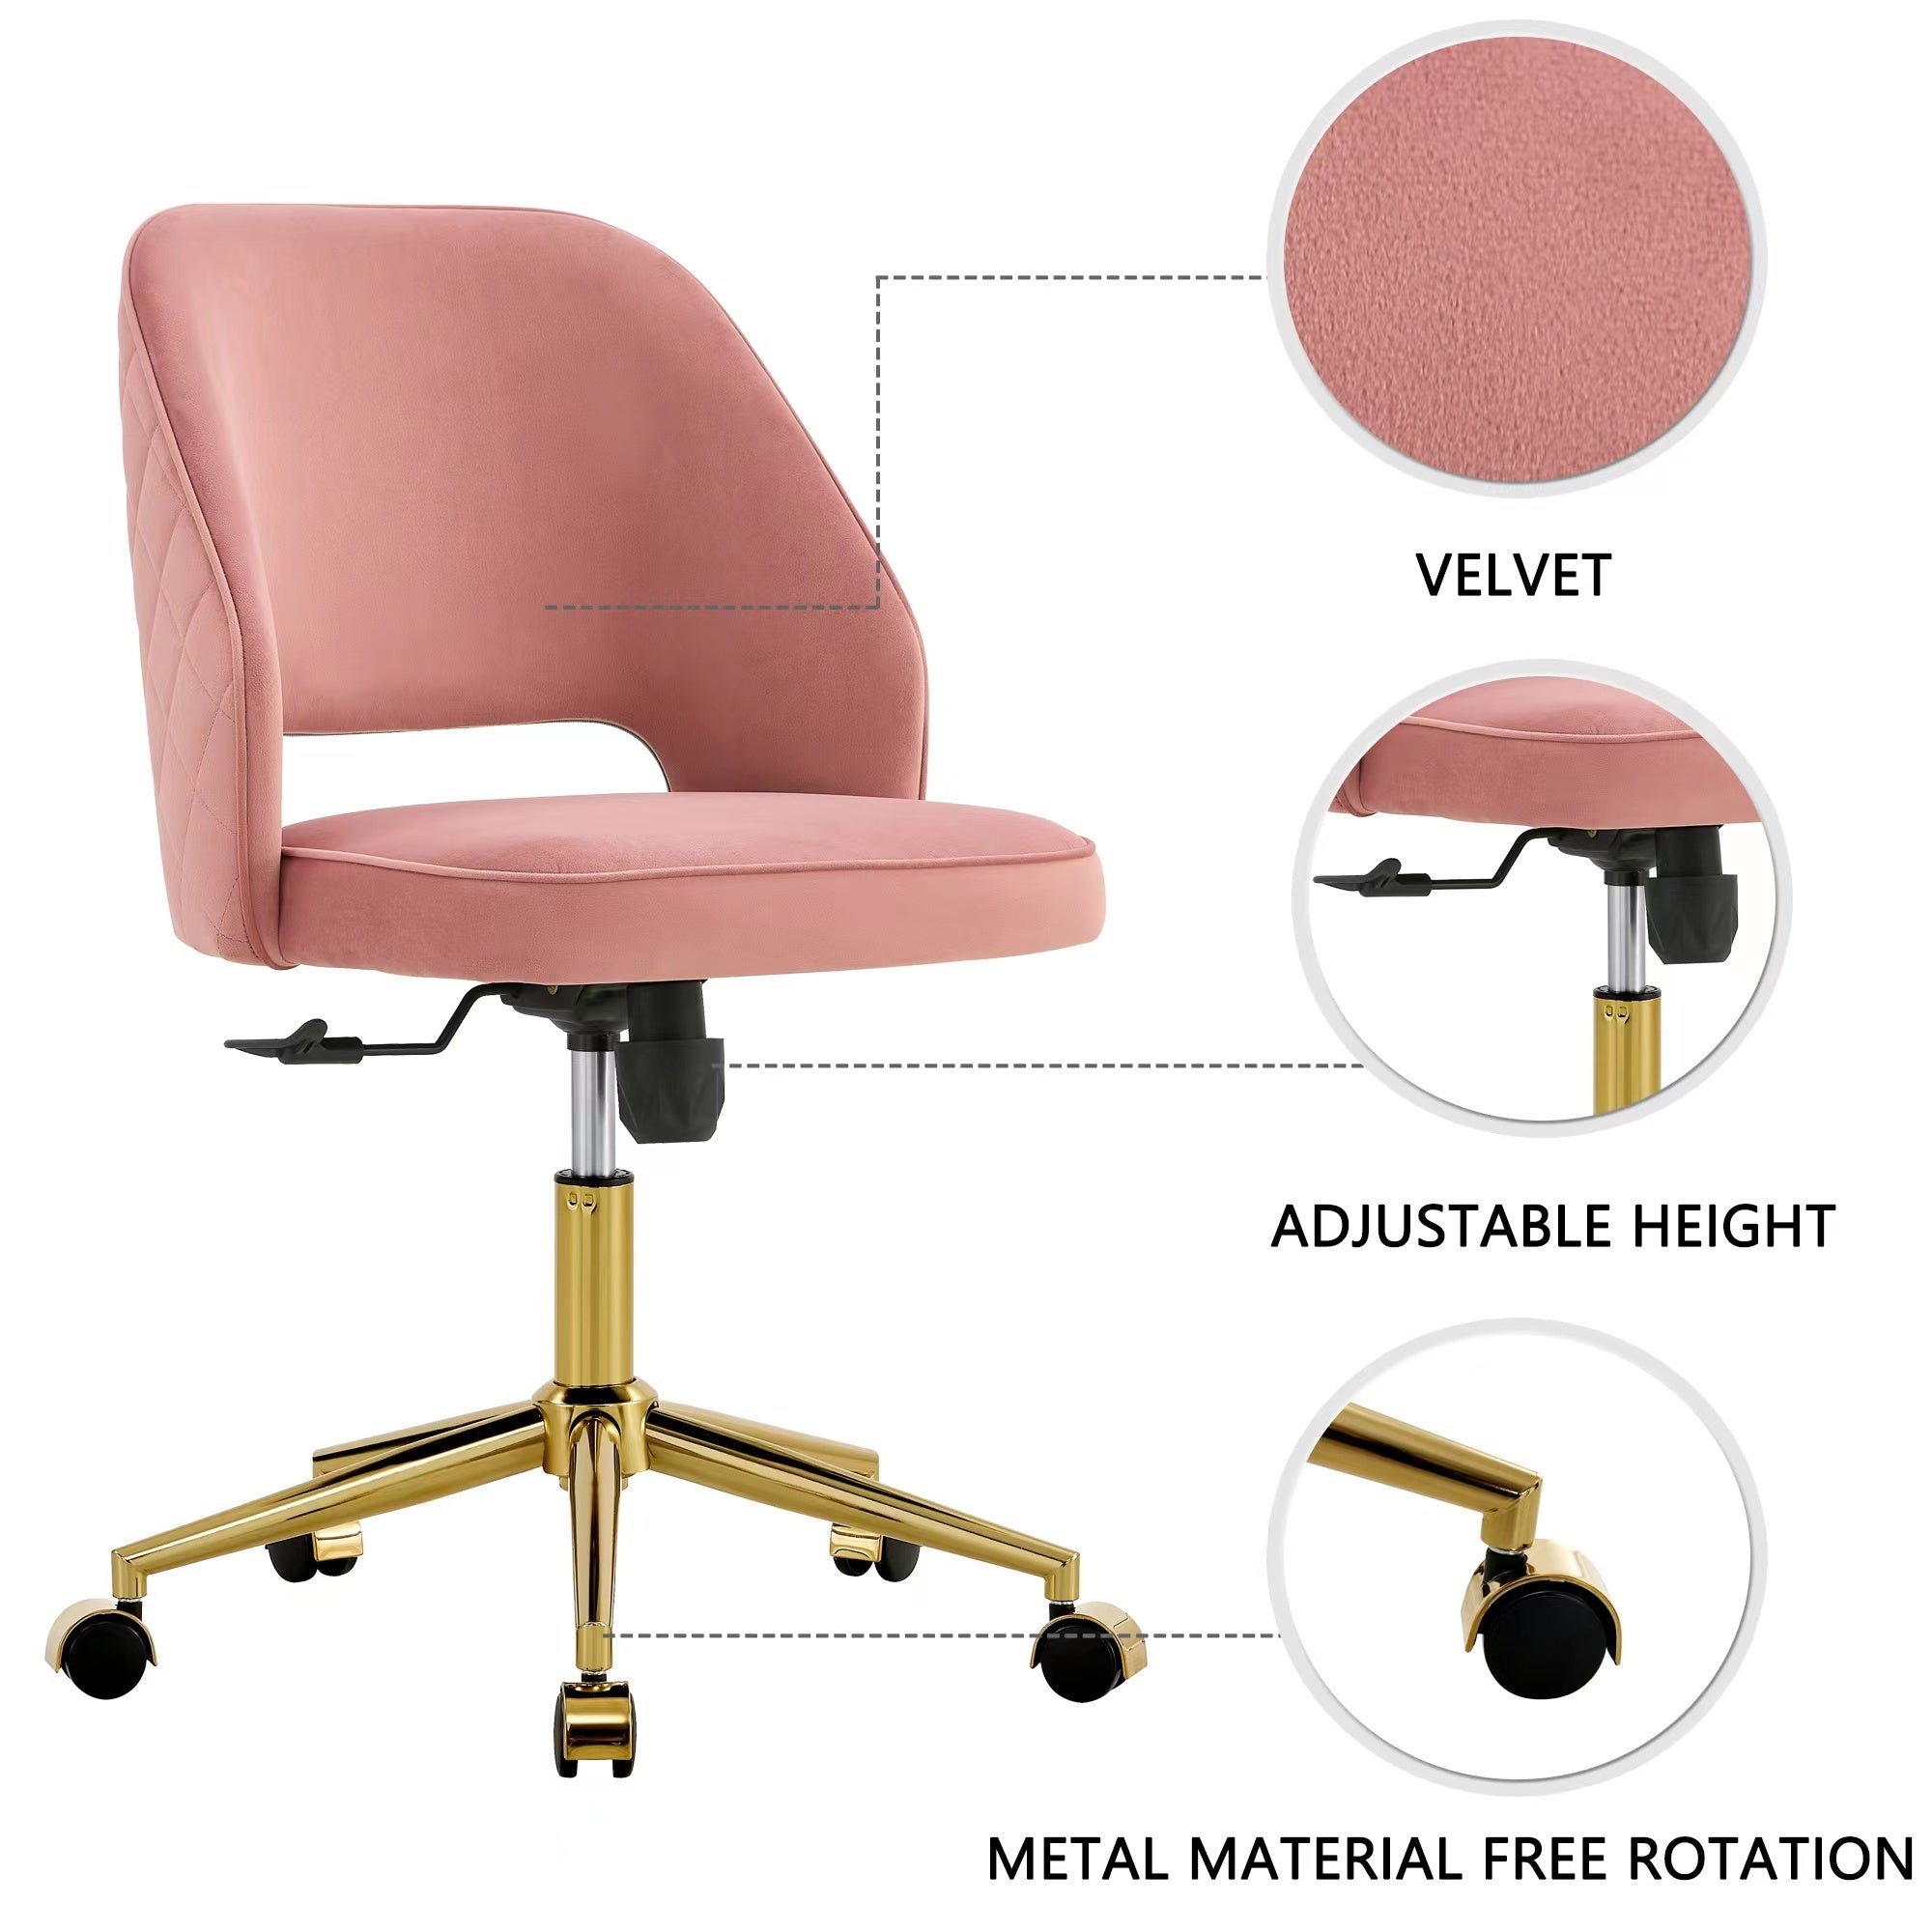 Modern Velvet Office Chairs, Adjustable 360 °Swivel Chair With Wheels - Pink